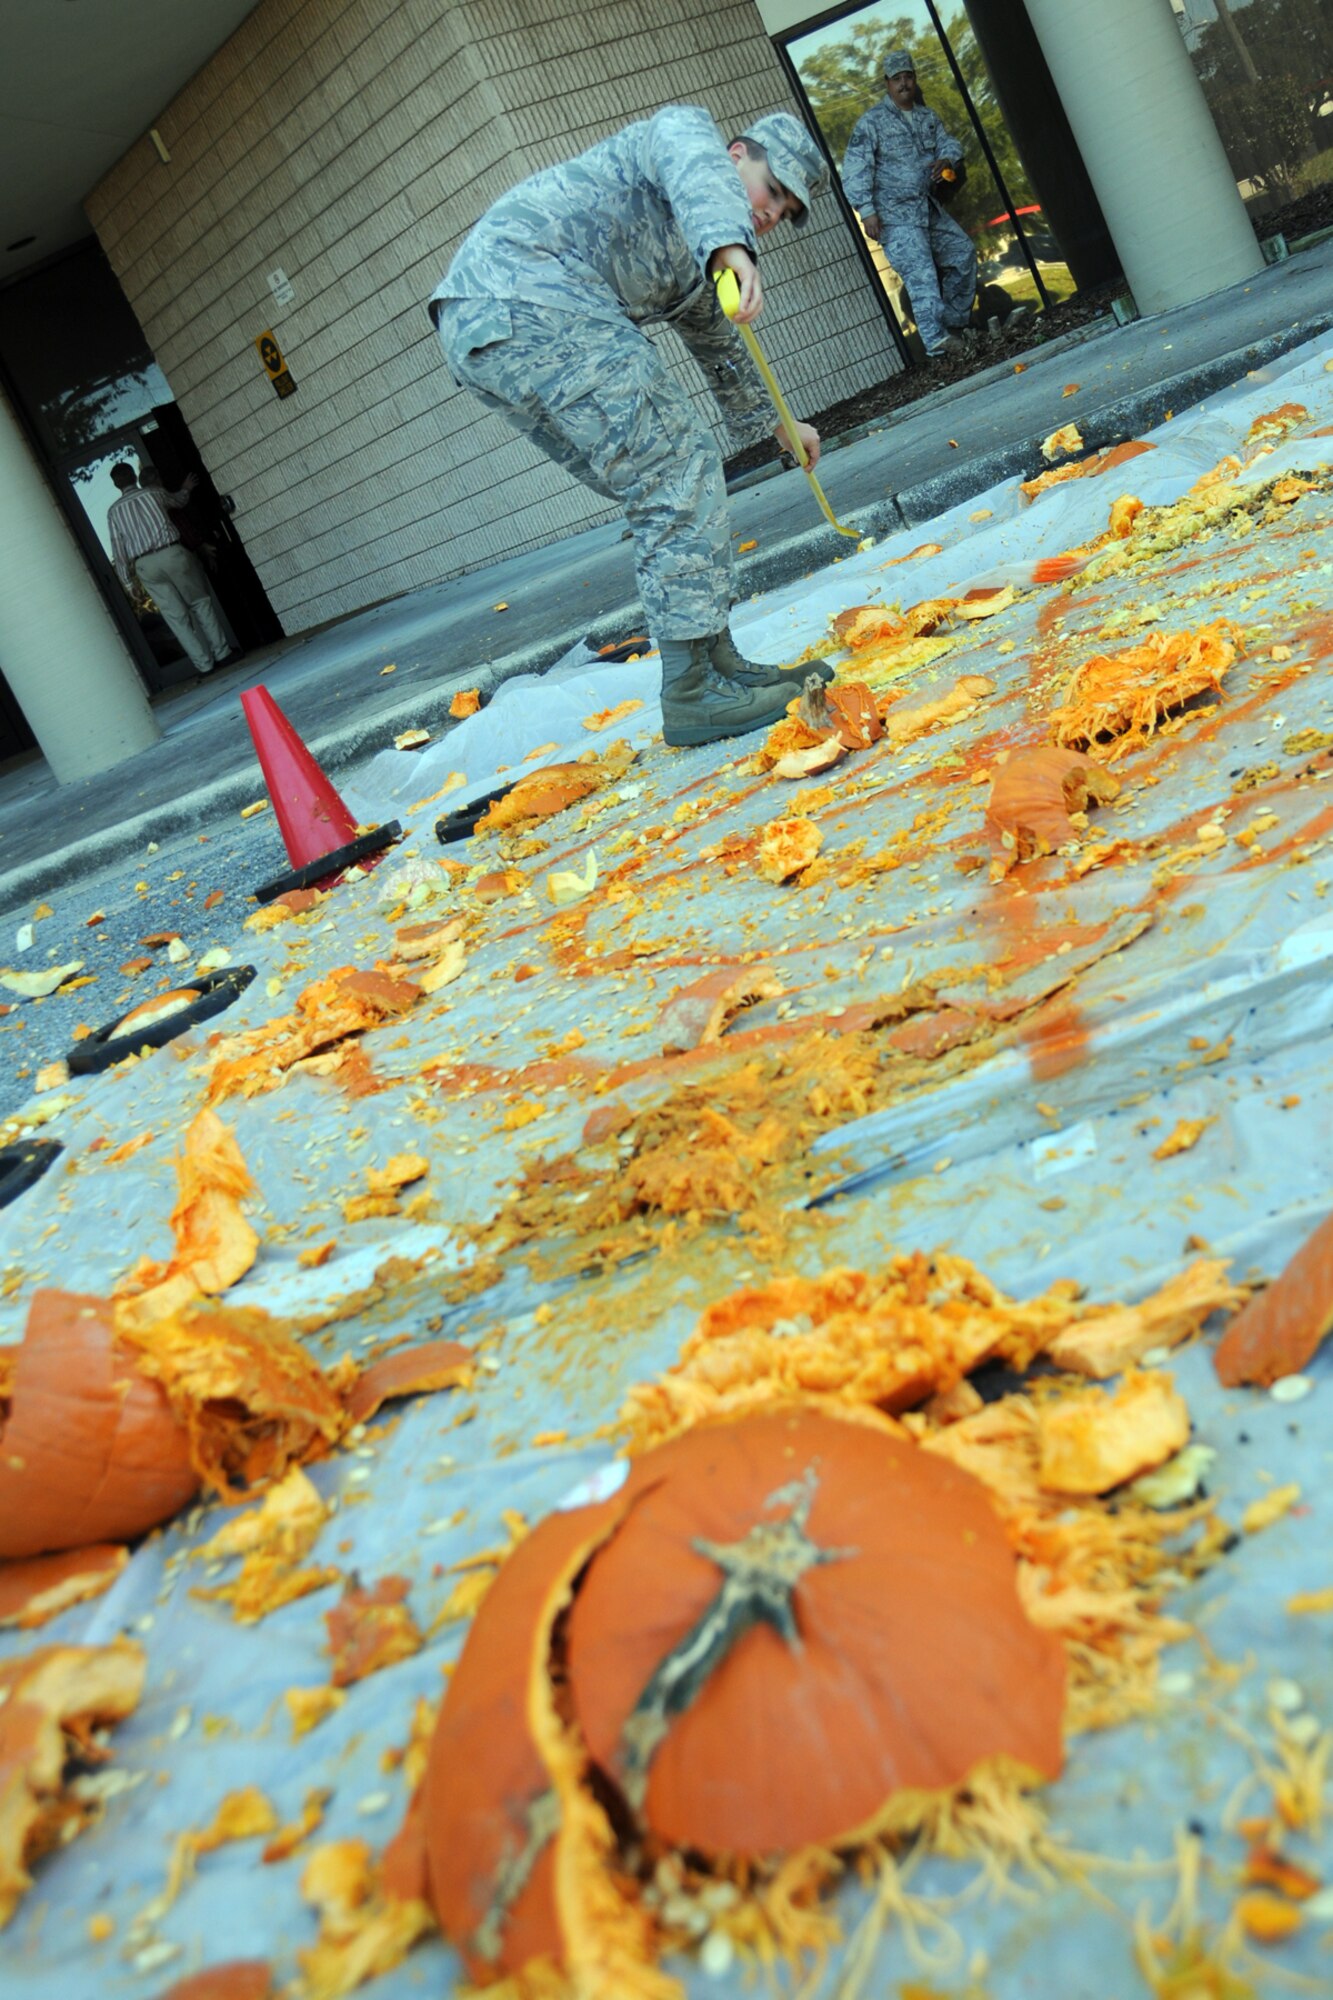 EGLIN AIR FORCE BASE, Fla. – 2nd Lt. Matthew Saar, 28th Test and Evaluation Squadron, measures the impact location of obliterated pumpkin remains from the target during a Pumpkin Smash competition Nov. 12. Participants tossed pumpkins from the top of a six-story building, aiming at a target on the ground. The event was hosted by the 53rd Wing as a fundraiser for their upcoming Children’s Christmas Party. (U.S. Air Force/ Airman 1st Class Anthony Jennings)